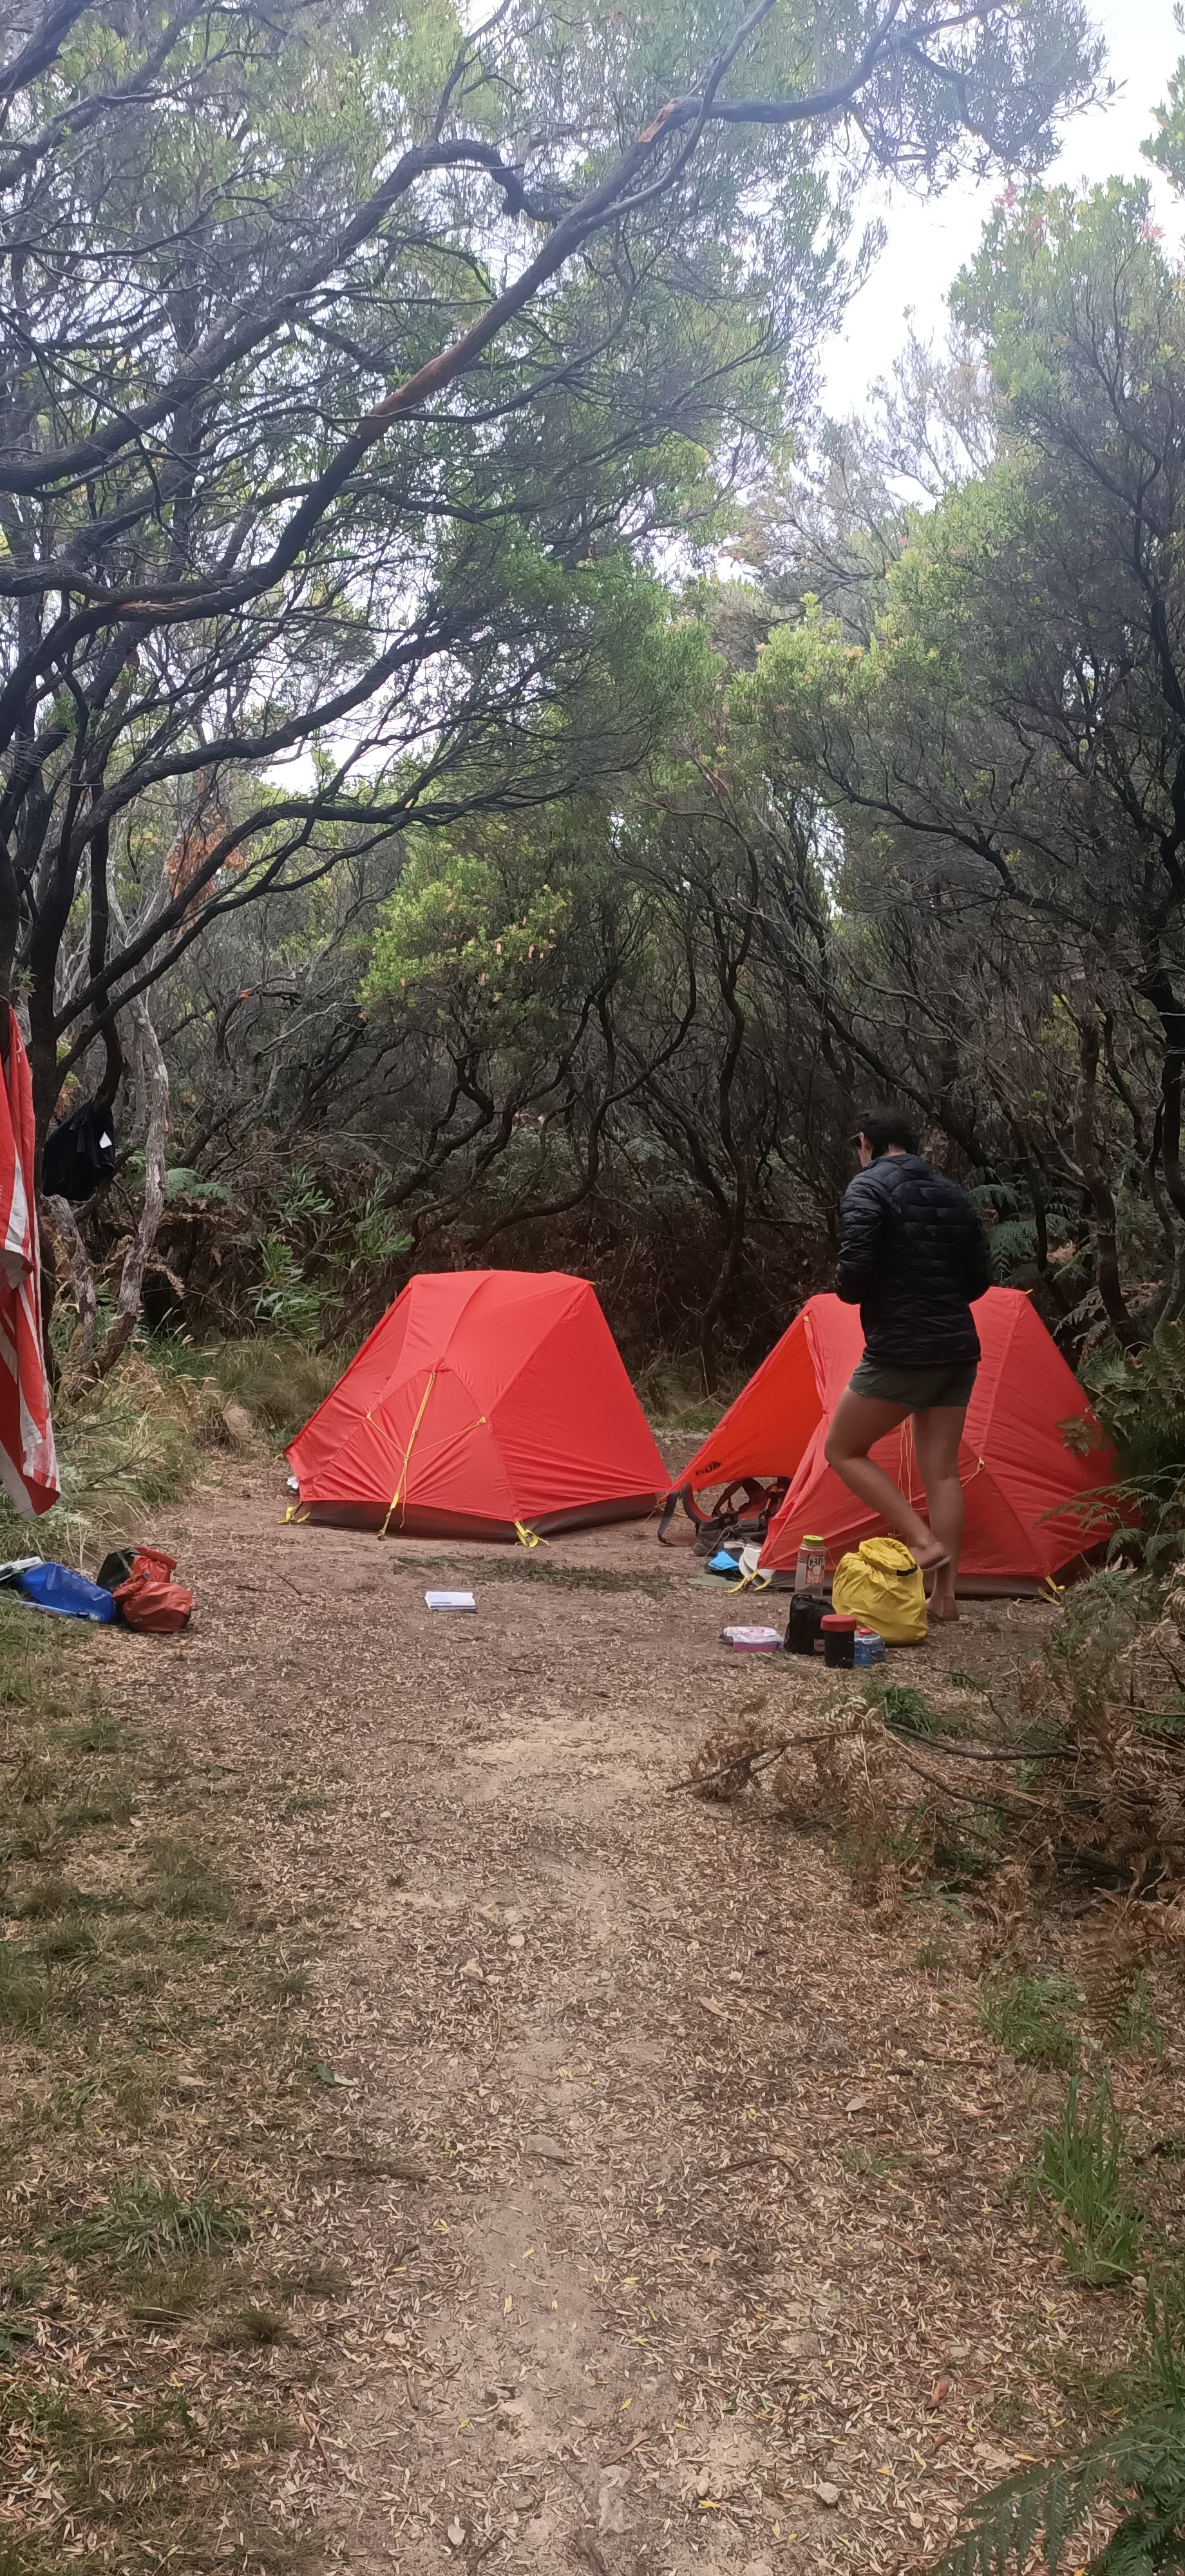 Camp setup at Cape Otway Hike-In. In the foreground there is the sandy great ocean road trail leading into the campsite which is surrounded by beautiful coastal tea trees. There are two red hiking tents with a person wandering around them setting up camp amongst scattered hiking equipment.